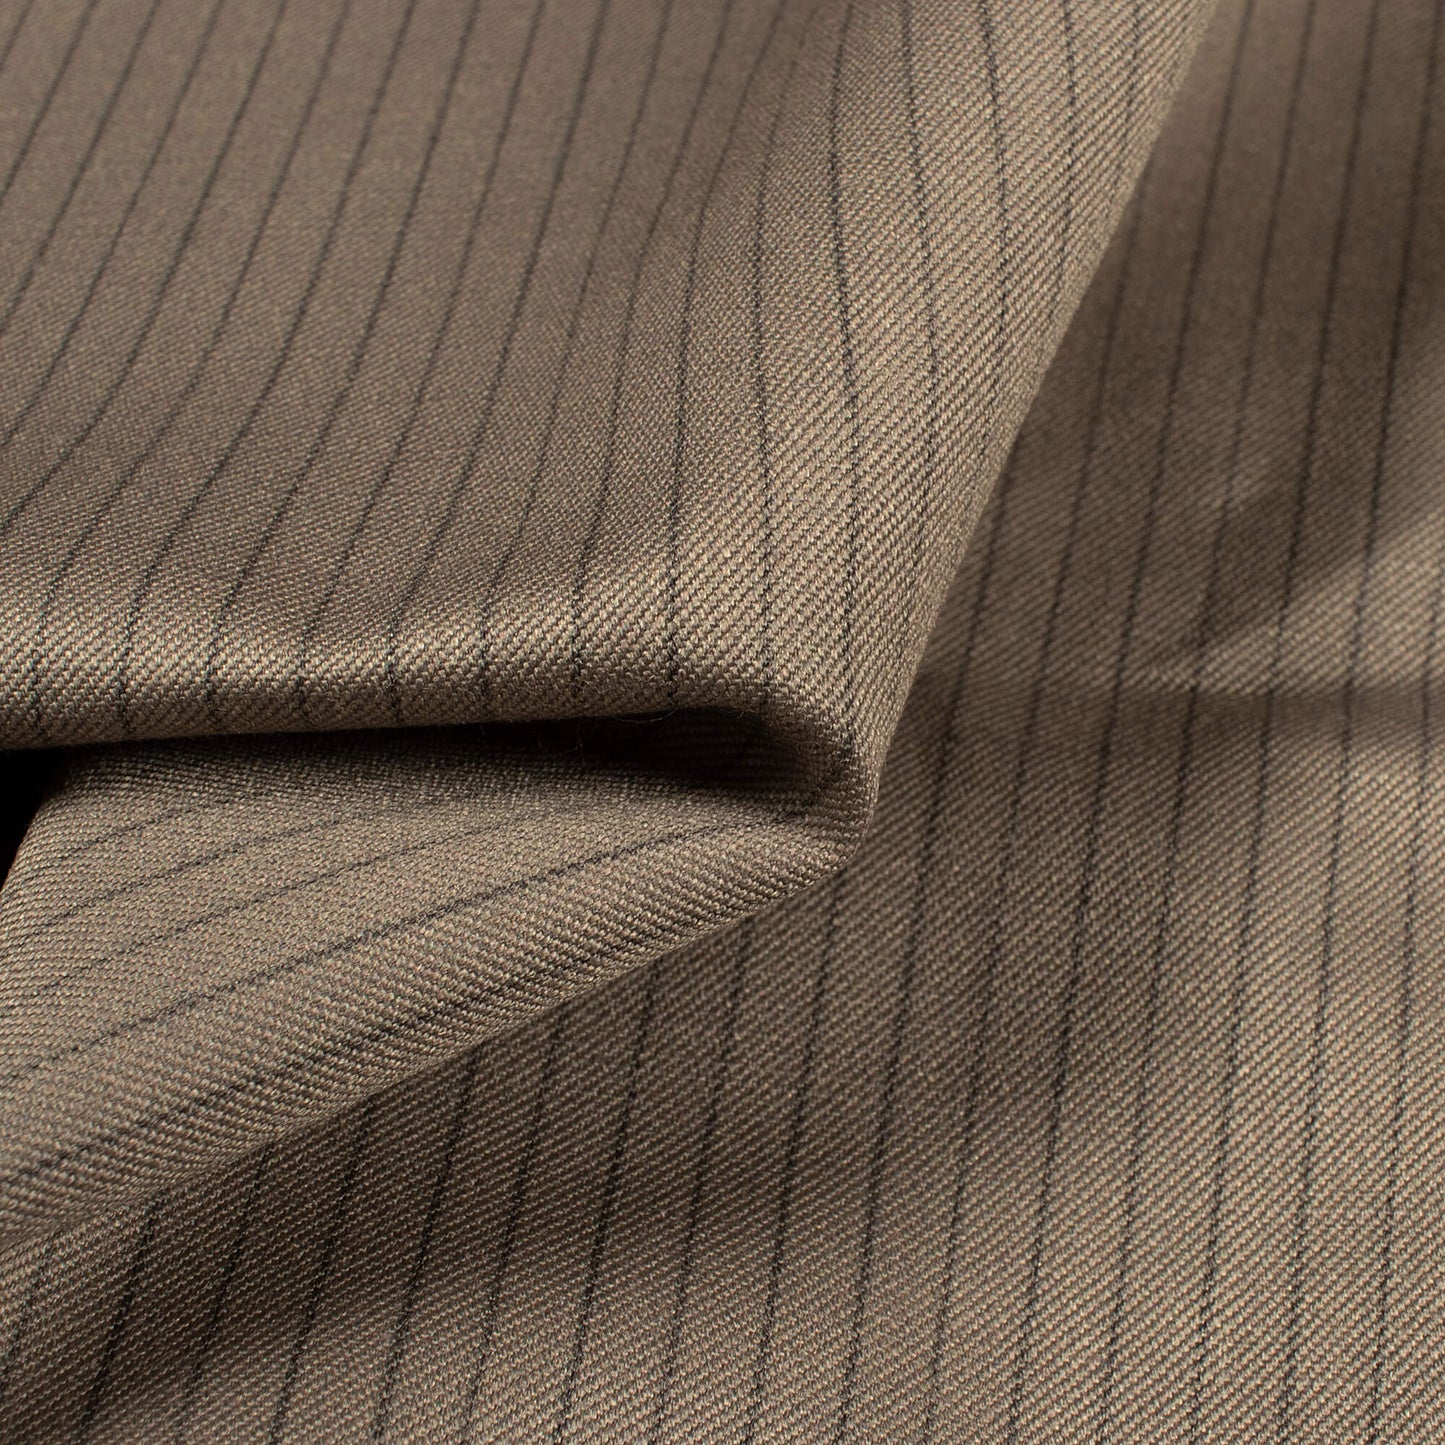 Stone Grey Stripes Printed Luxury Suiting Fabric